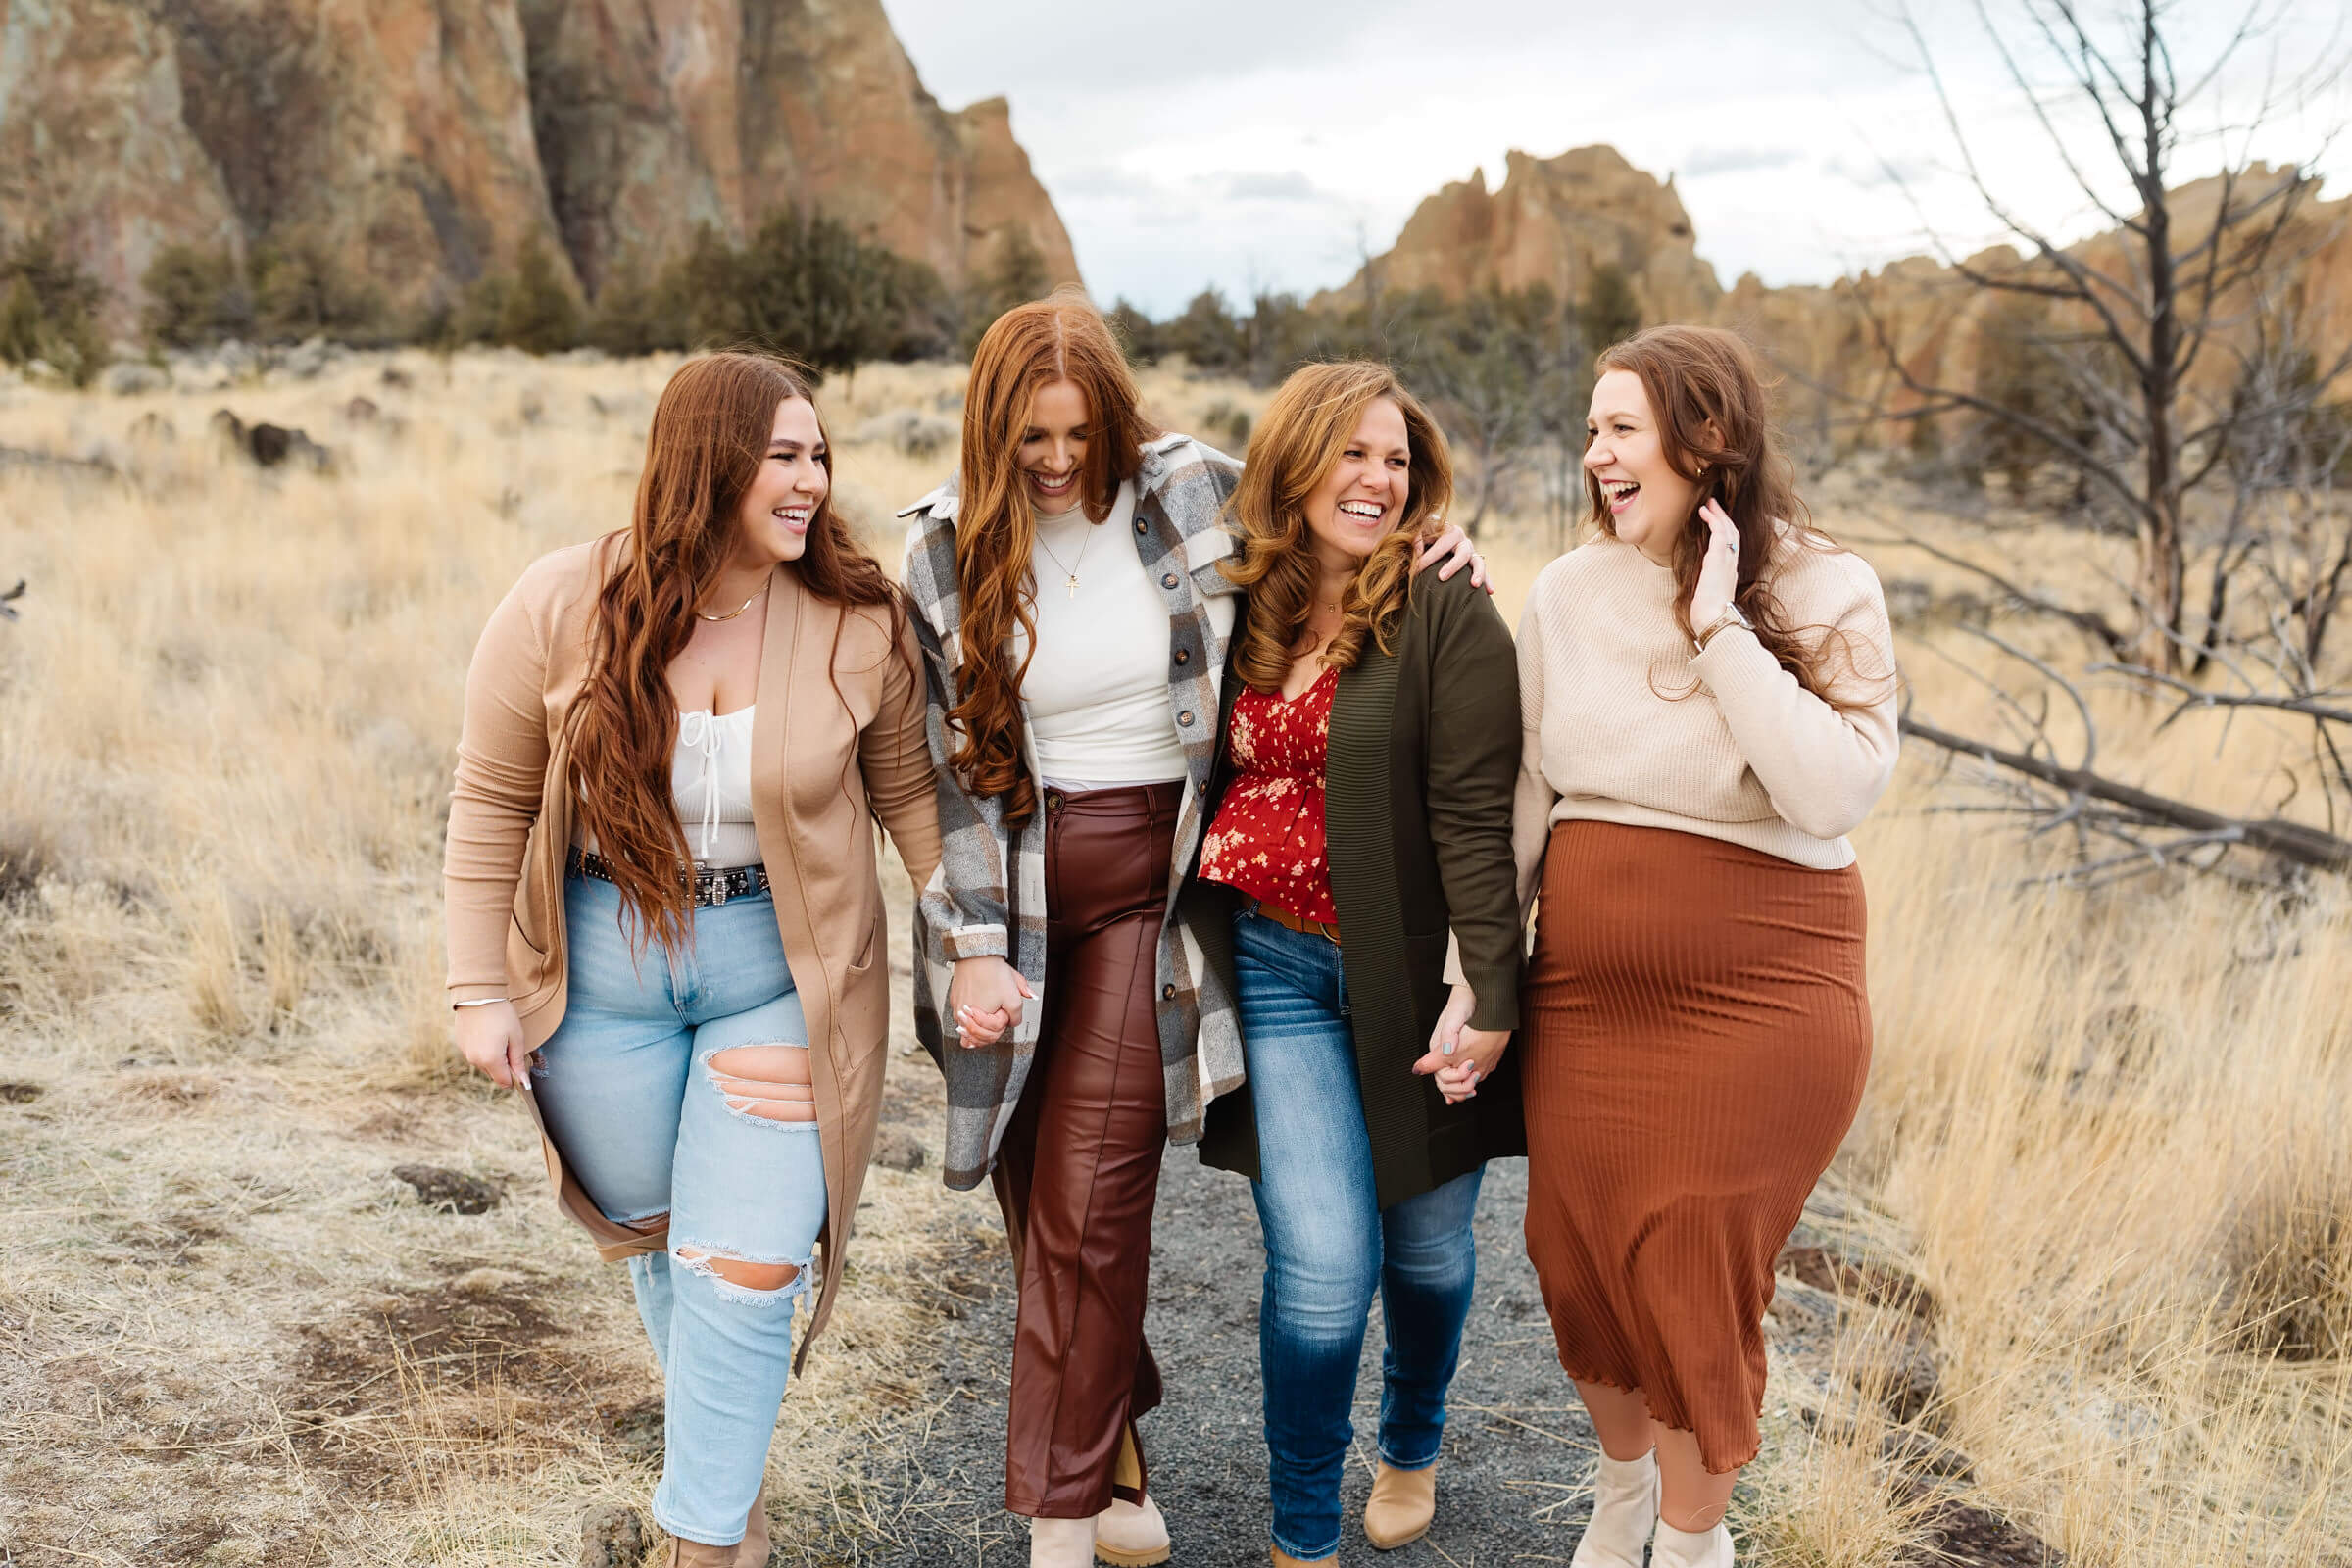 four women with red hair holding hands and walking together laughing during smith rock family photoshoot